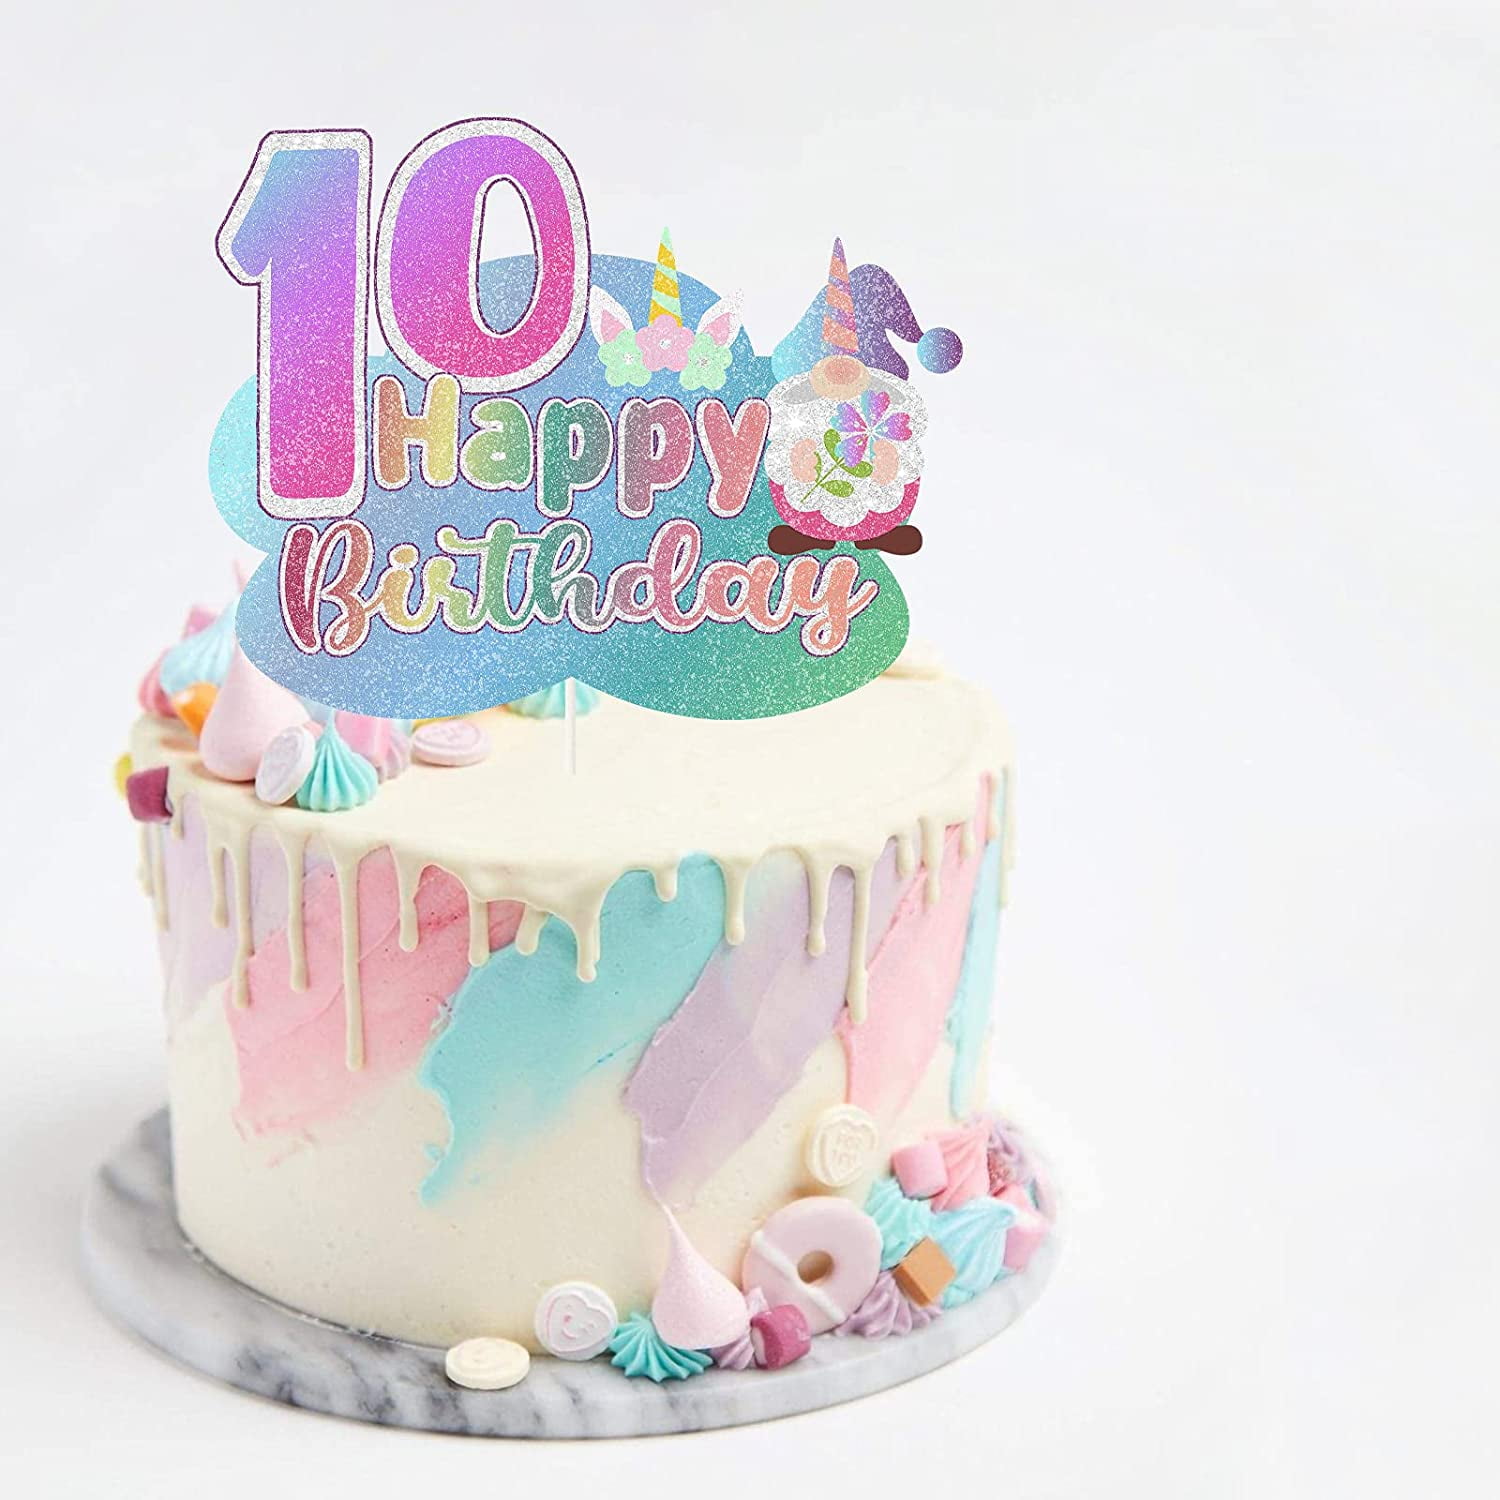 Amber's Cakes and Cupcakes - No 10 Pretty Birthday Cake. Vanilla with  Butter Vanilla Buttercream. | Facebook